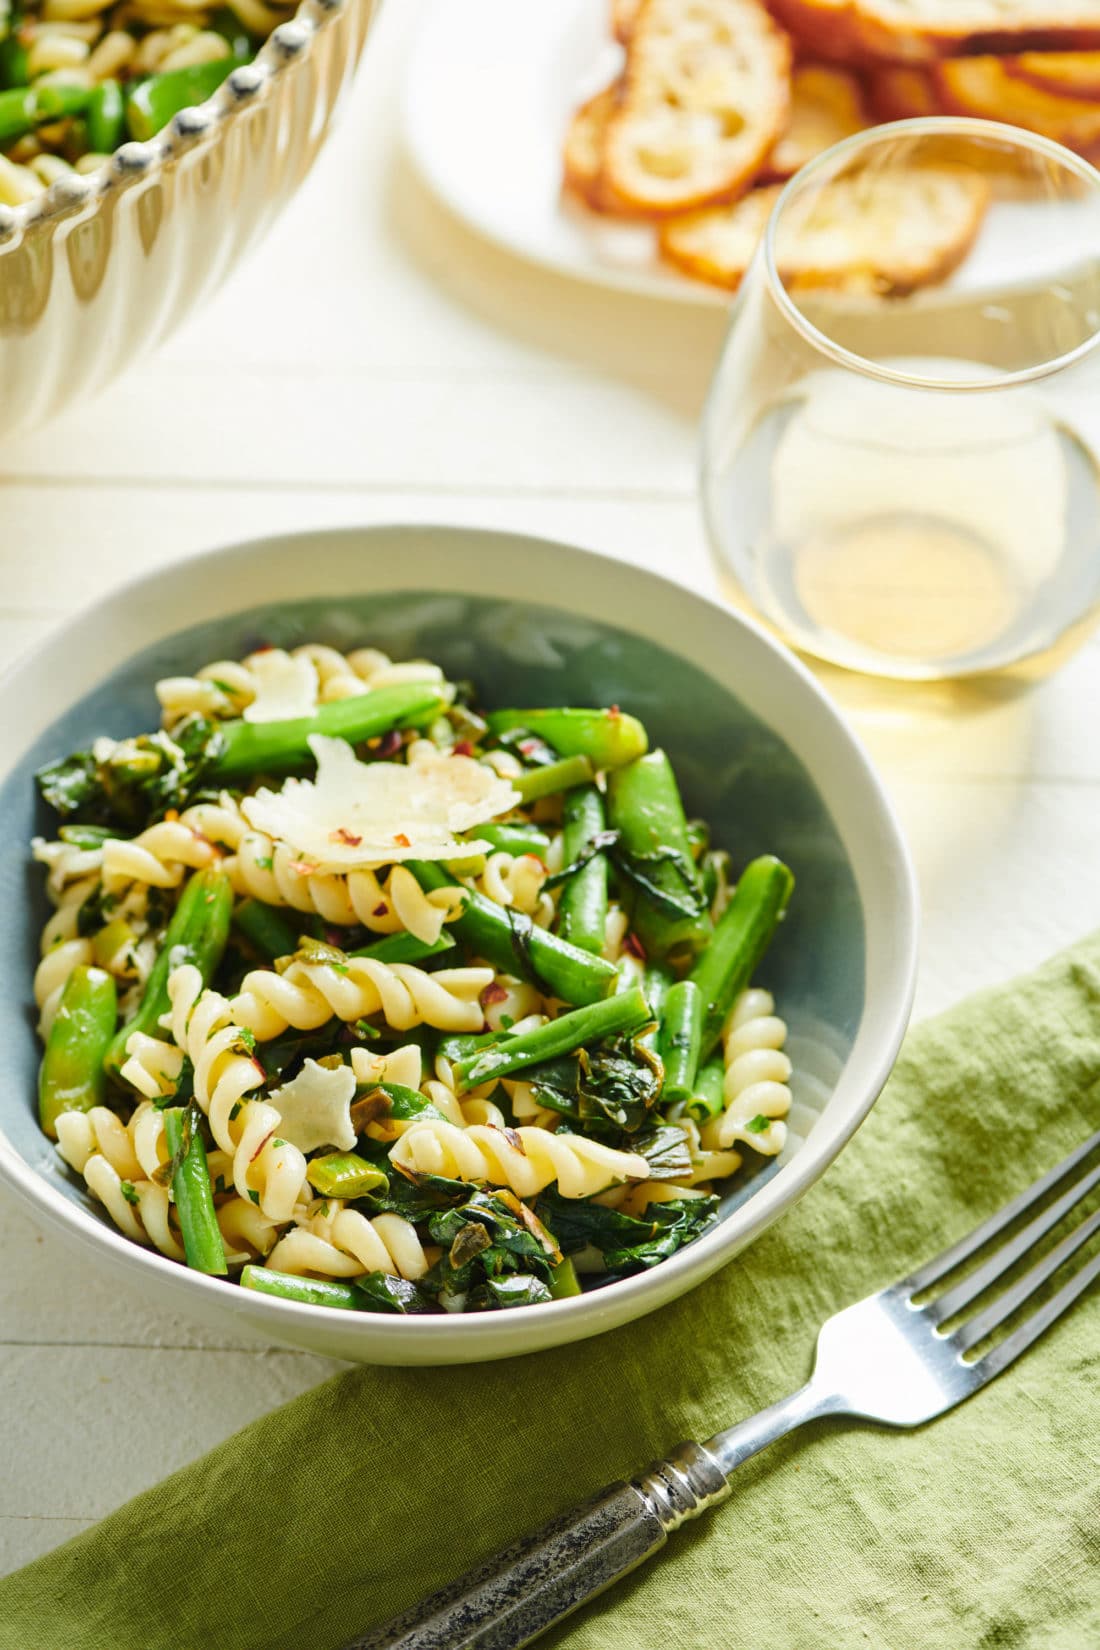 Lemony Rotini with Goat Cheese Sauce and Spring Vegetables